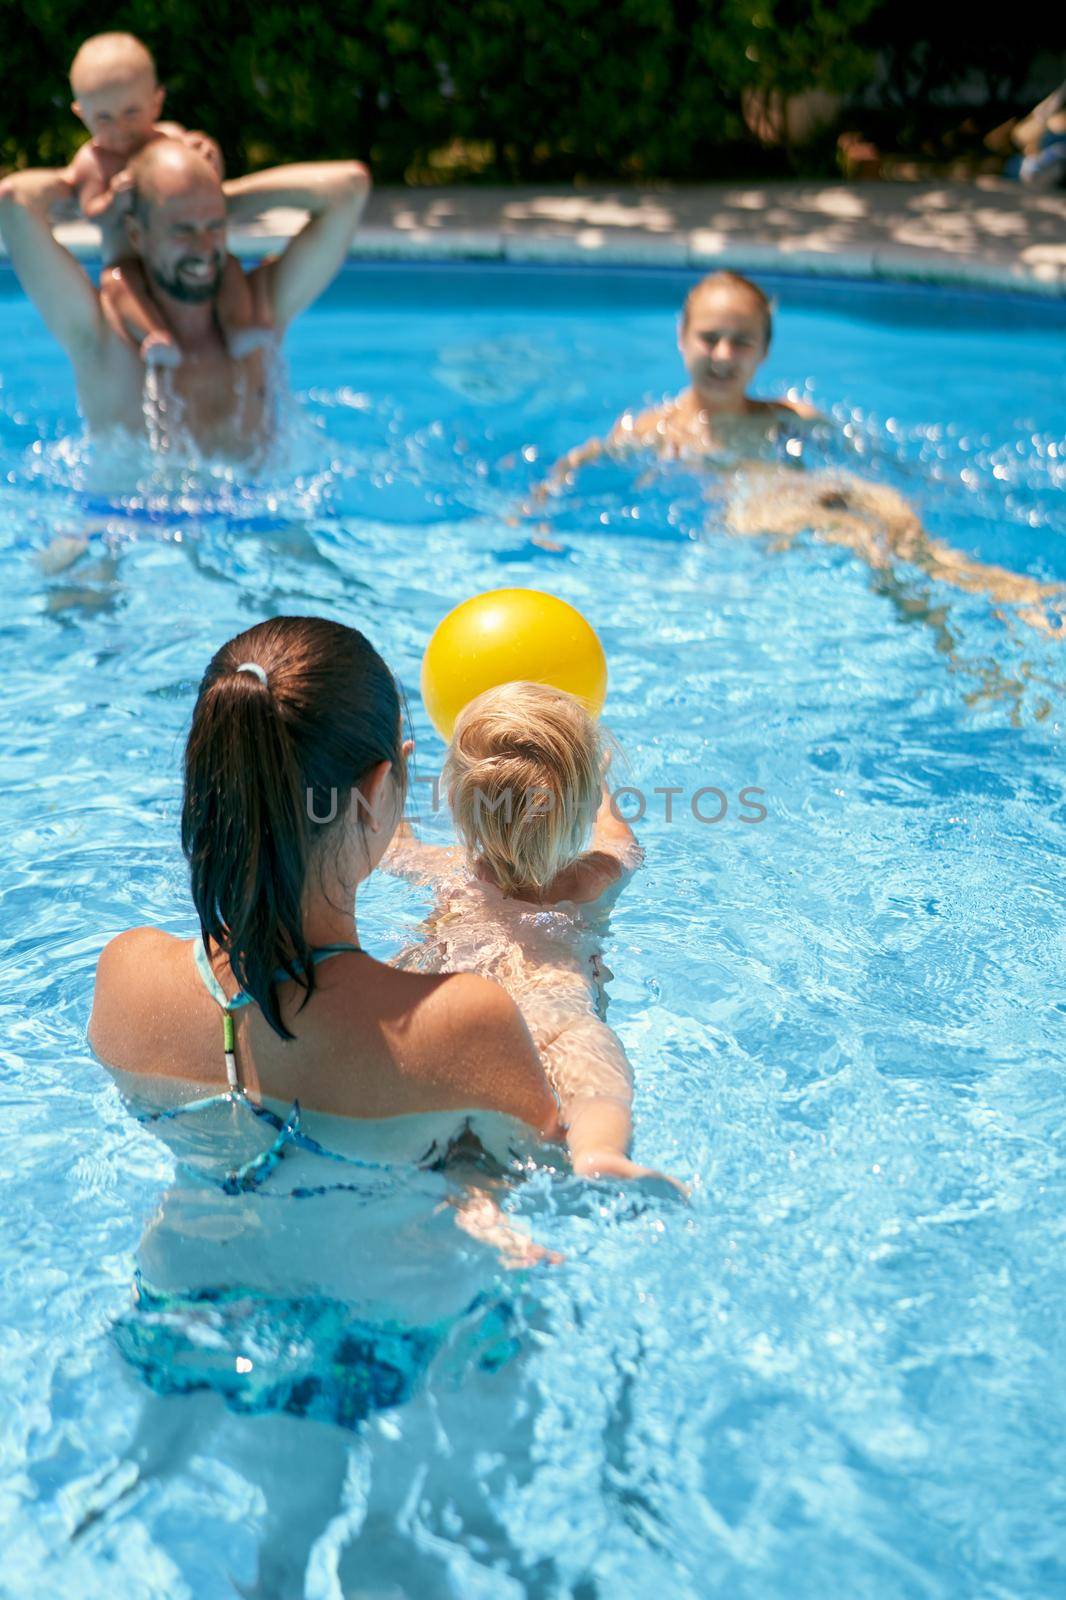 Parents with small kids playing with a ball in the pool by Nadtochiy